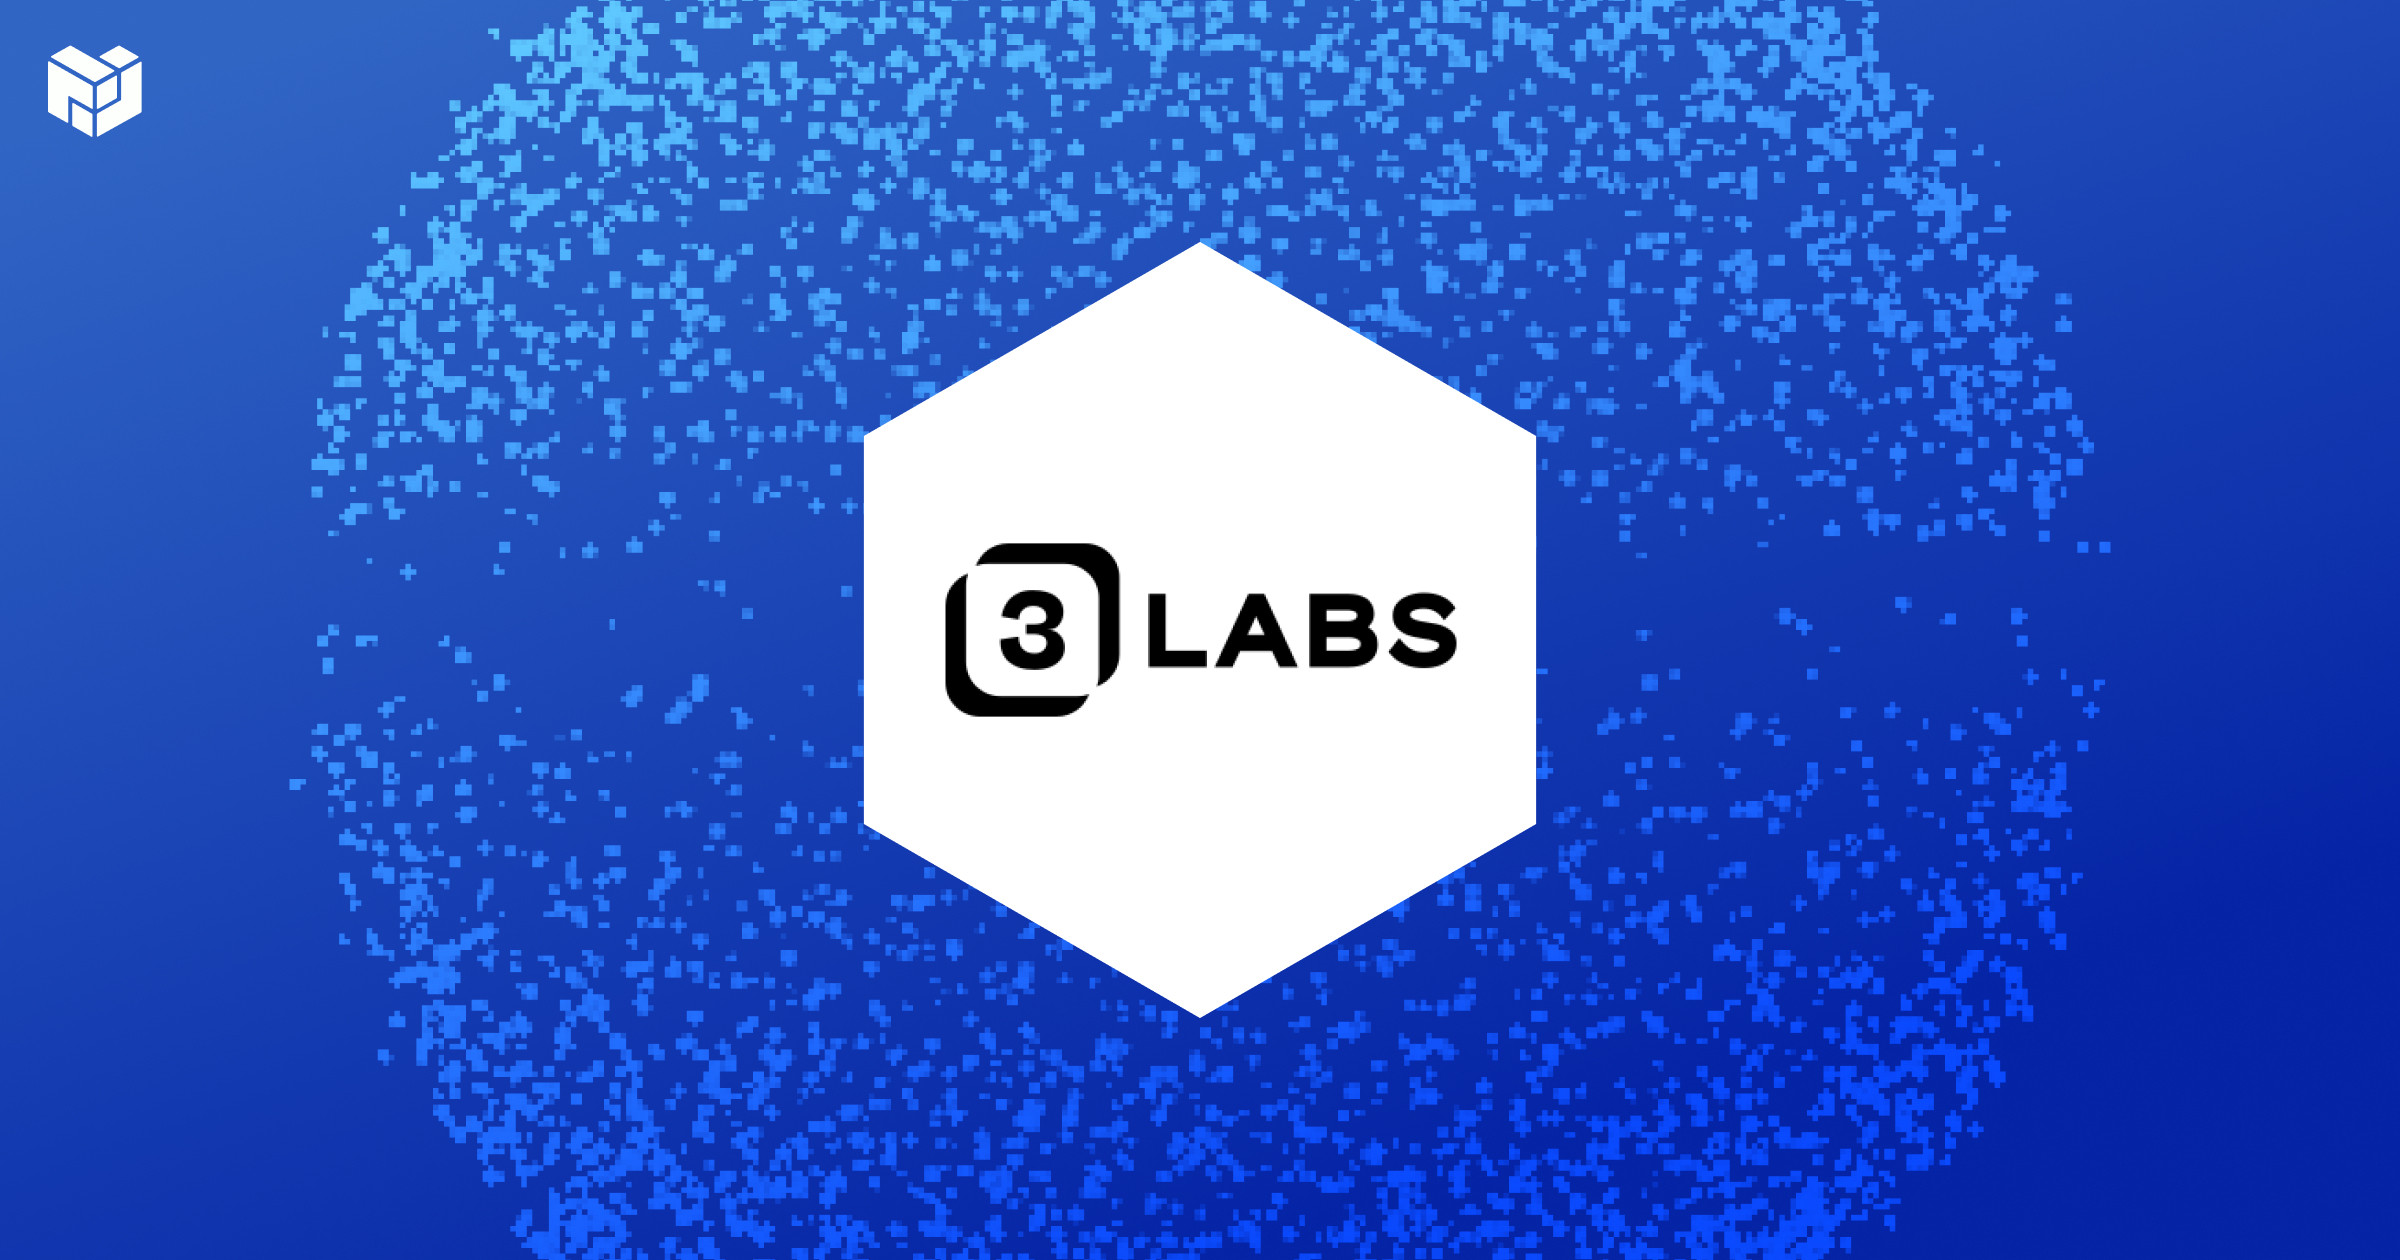 Meet 3Box Labs: Building a Web of Trust with Data | Protocol Labs